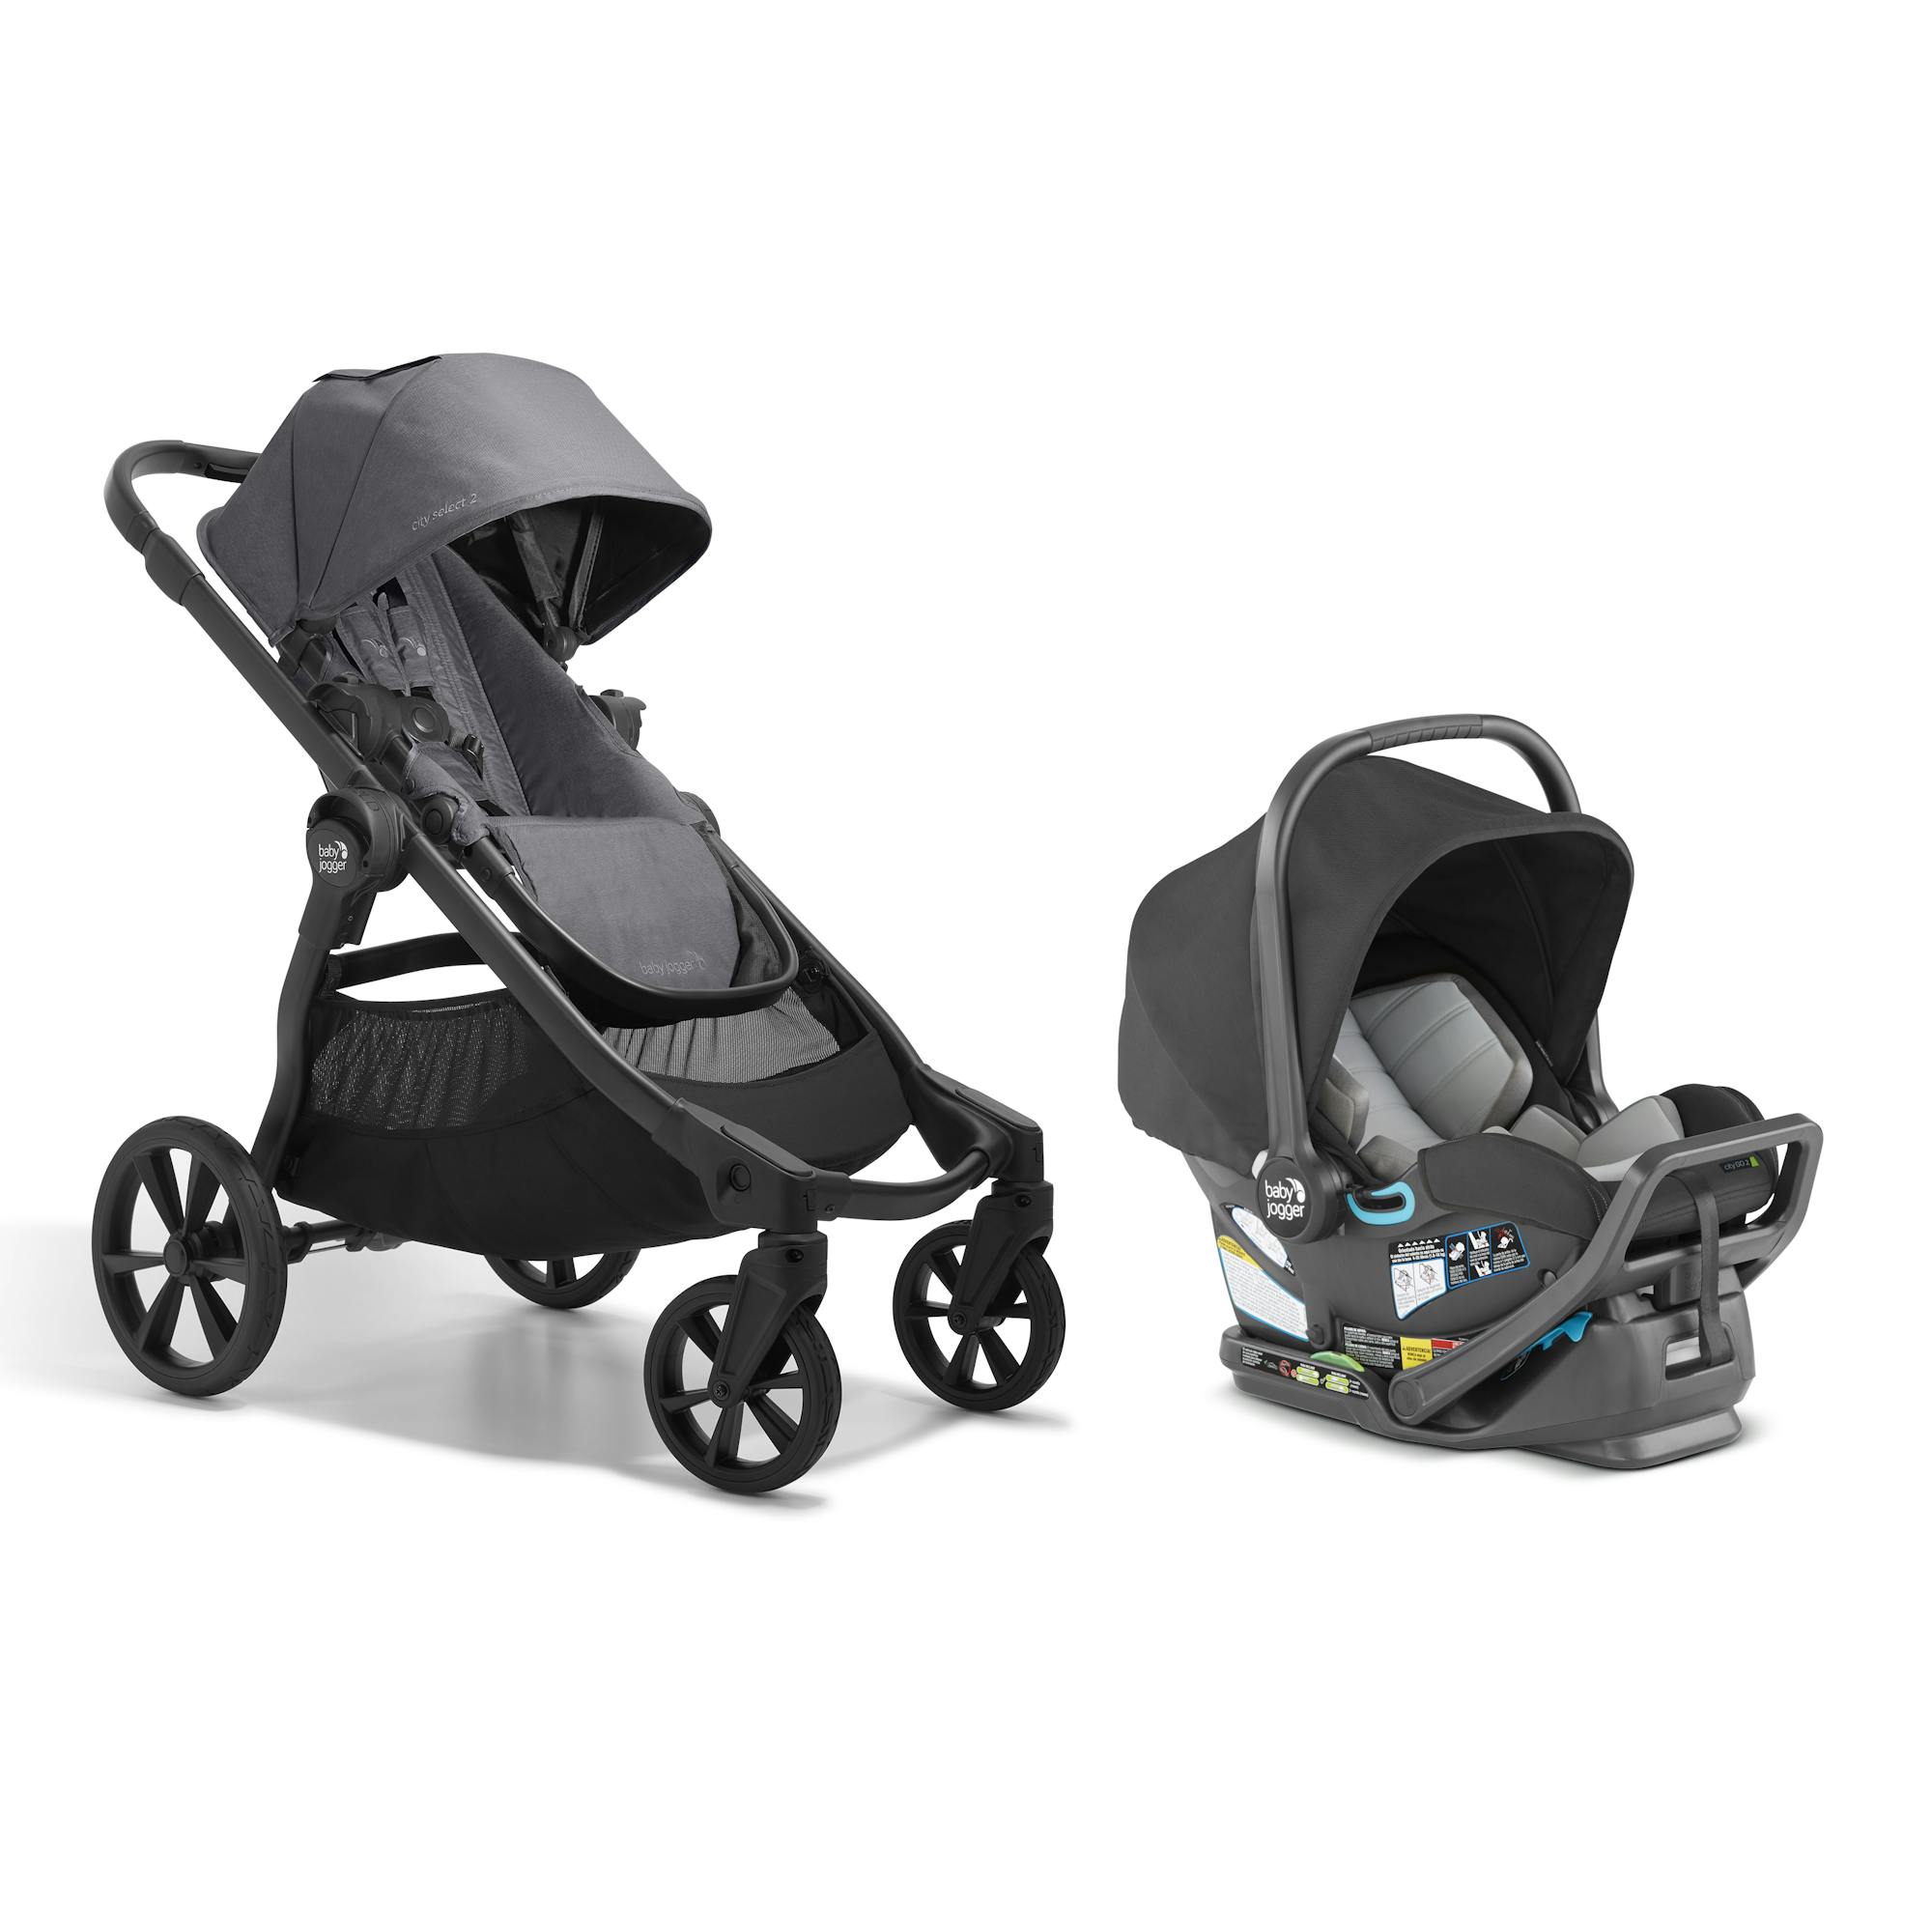 city select® 2 travel system | Baby Jogger